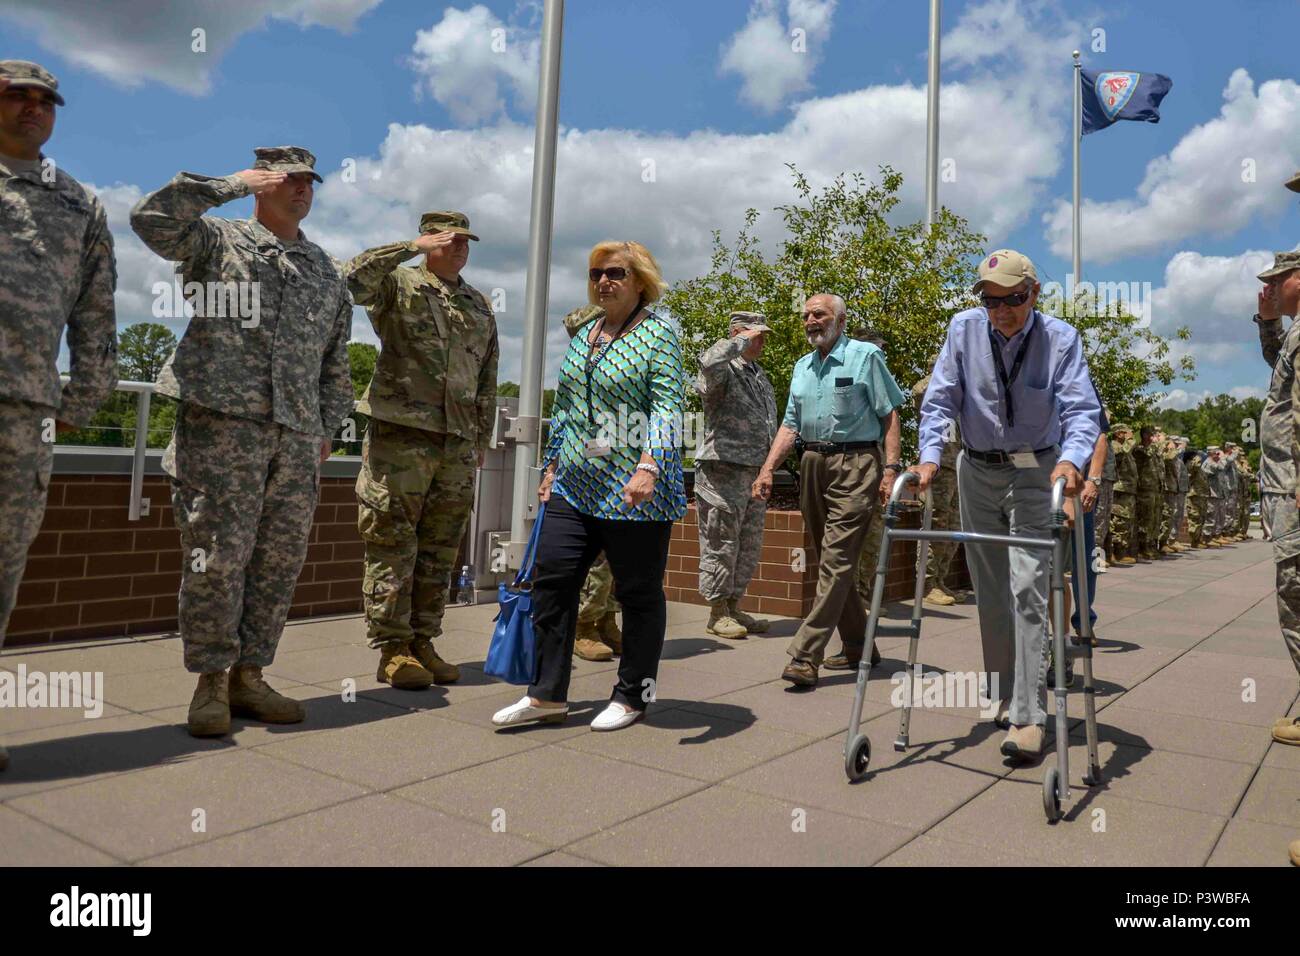 Raleigh, North Carolina – WWII Veterans of the 30th Infantry Division and their families’ walk down a path lined with current North Carolina National Guardsmen rendering salutes in front of Joint Force Headquarters in Raleigh, North Carolina, July 29, 2016. The day marked the beginning of the 30th Infantry Division Association’s 70th Reunion. (U.S. Army Photo by Staff Sgt. Mary Junell) Stock Photo